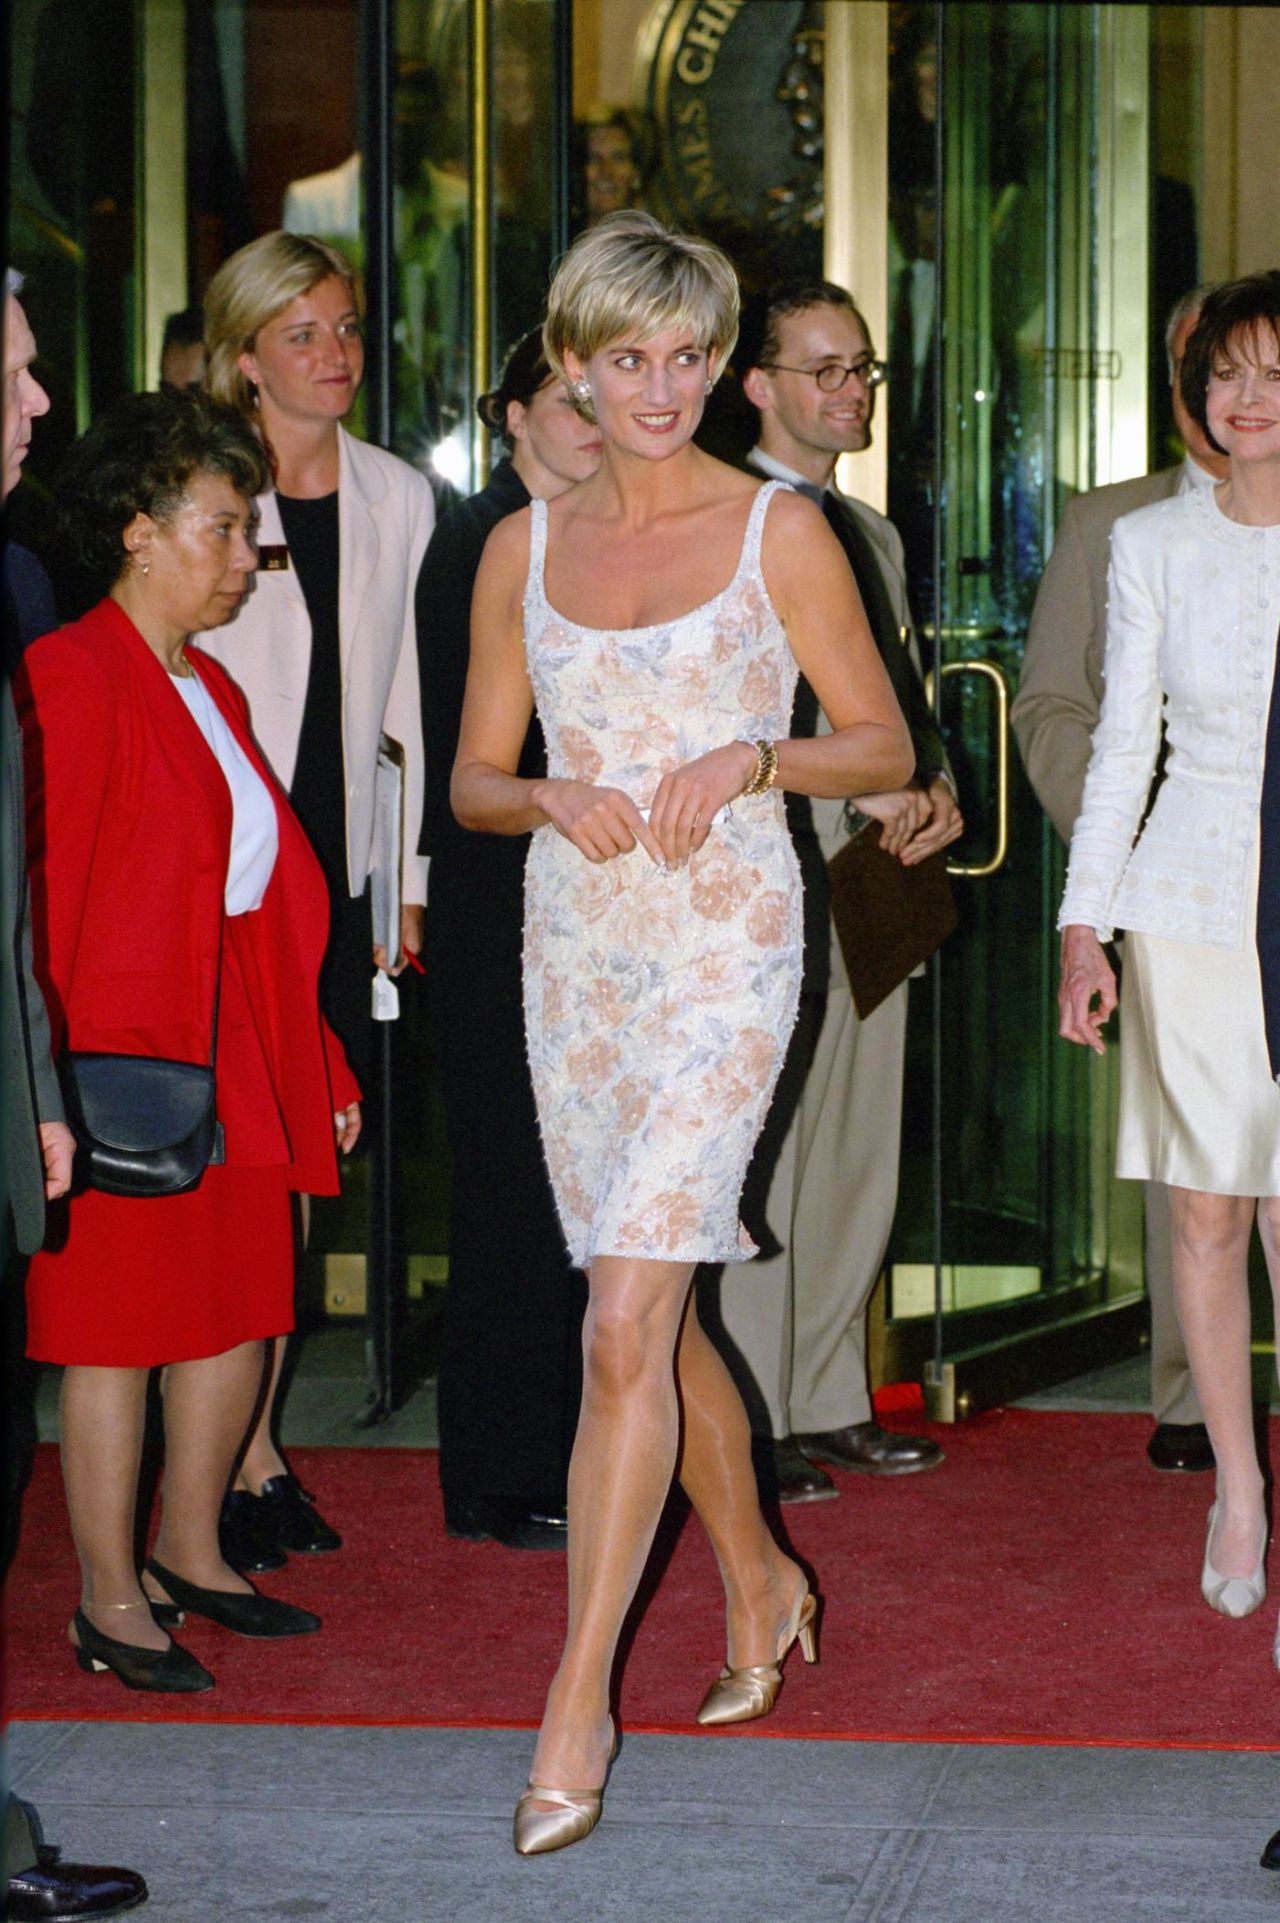 Princess Diana wearing a Catherine Walker mini dress to the launch of a 1997 Christie's auction, where she sold many of her most iconic outfits.